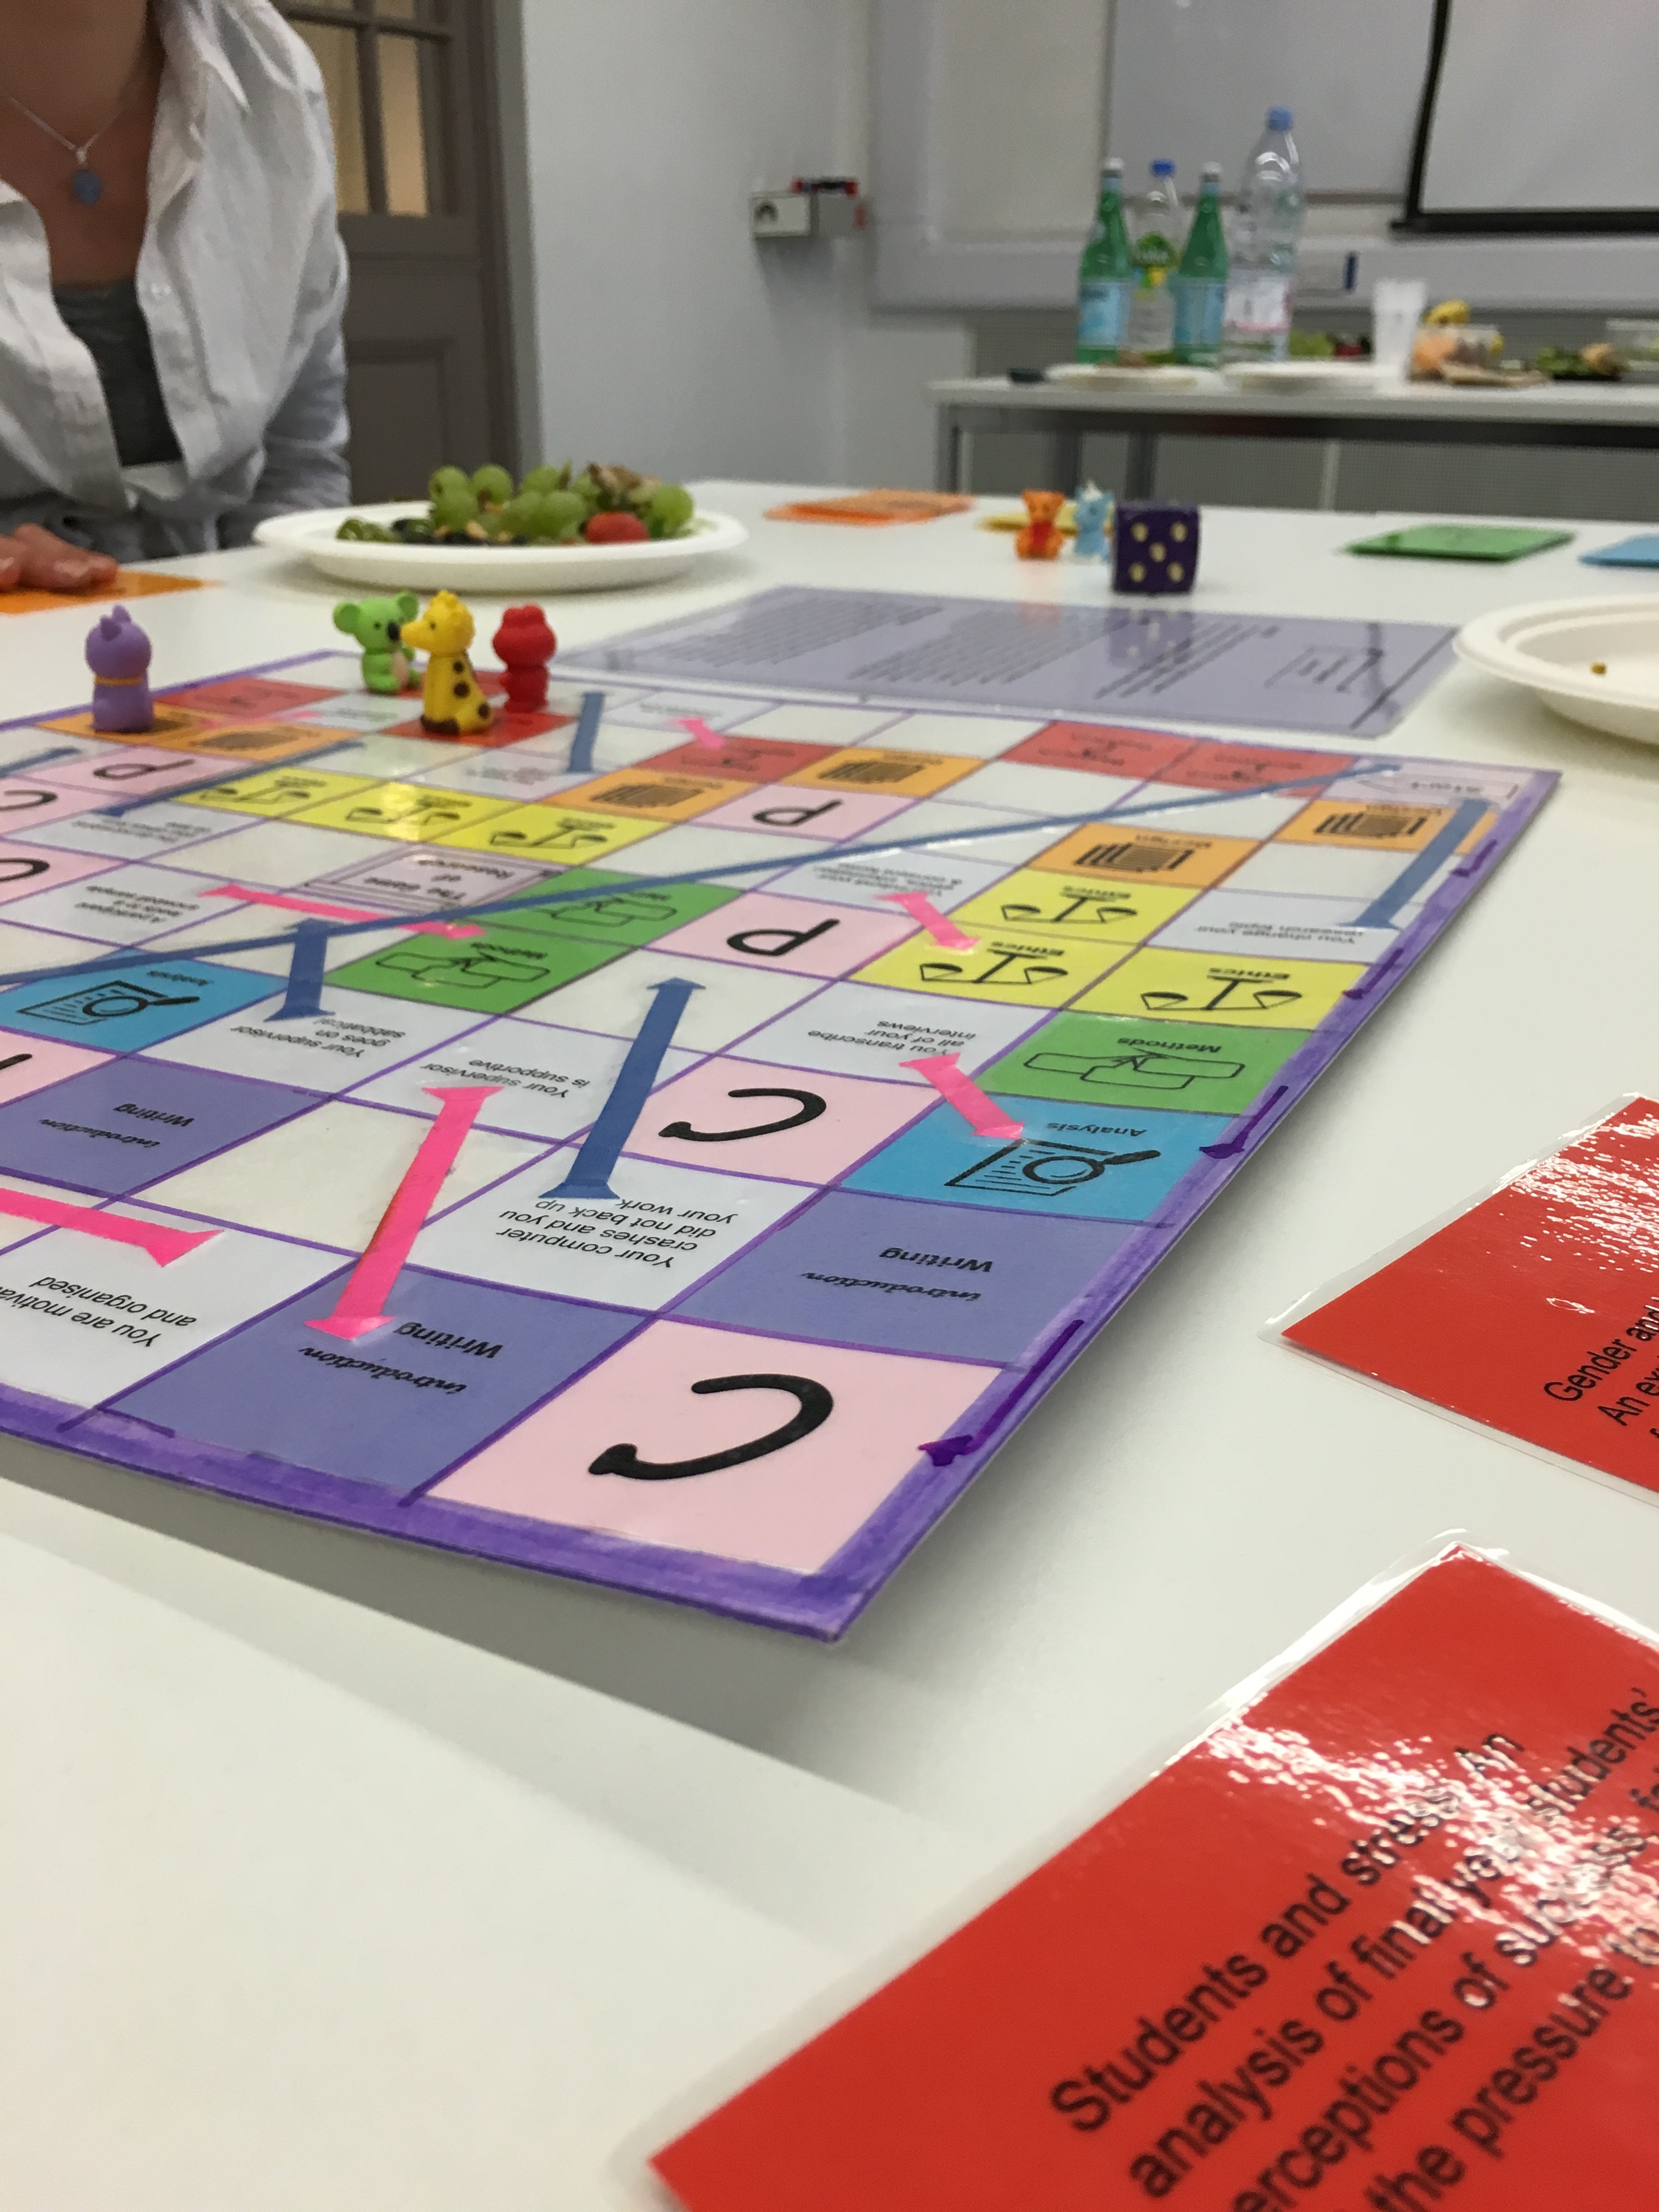 Game-based learning: teaching how to conduct a research project using a board game